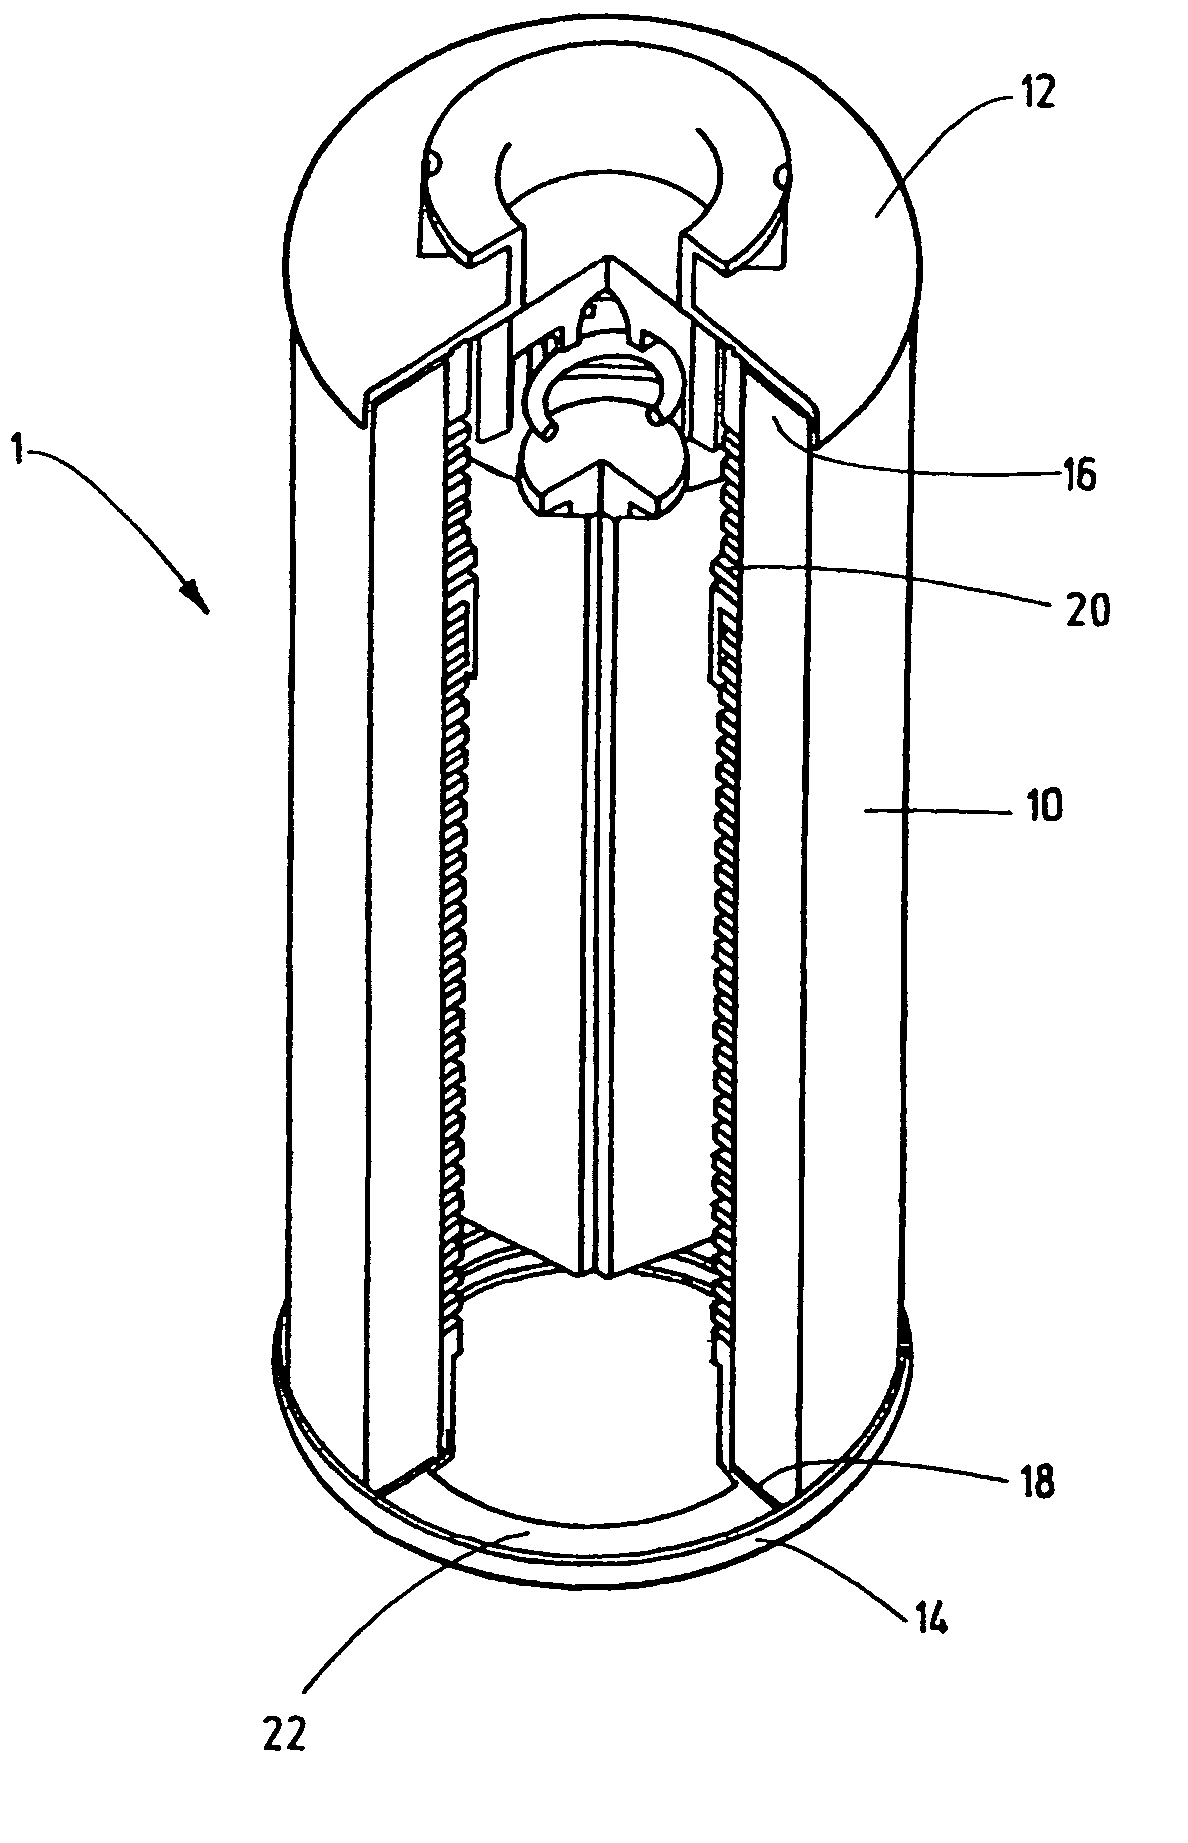 Filter device for purifying fluids